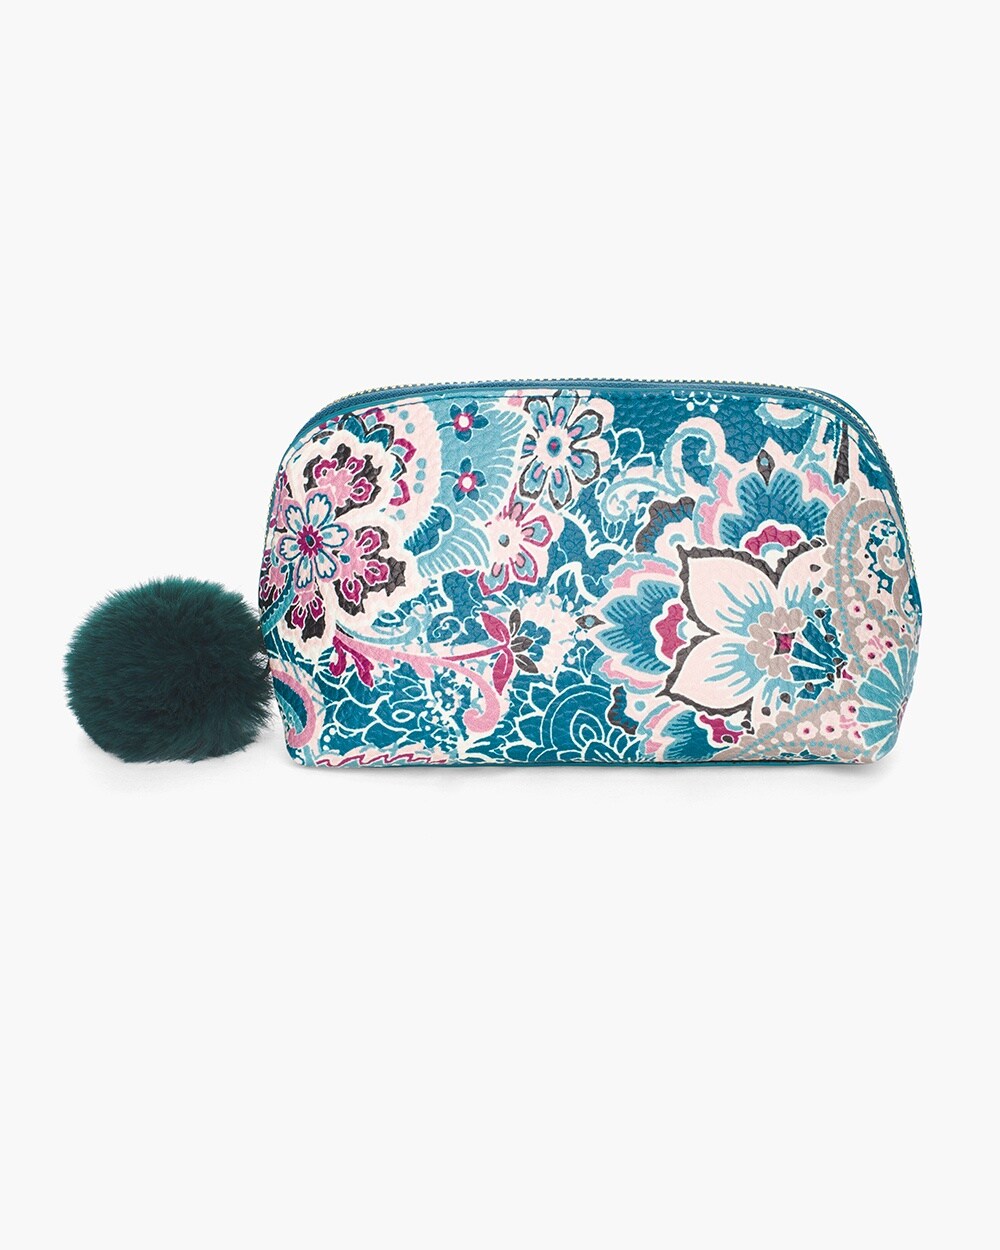 Floral Lace-Print Cosmetic Case